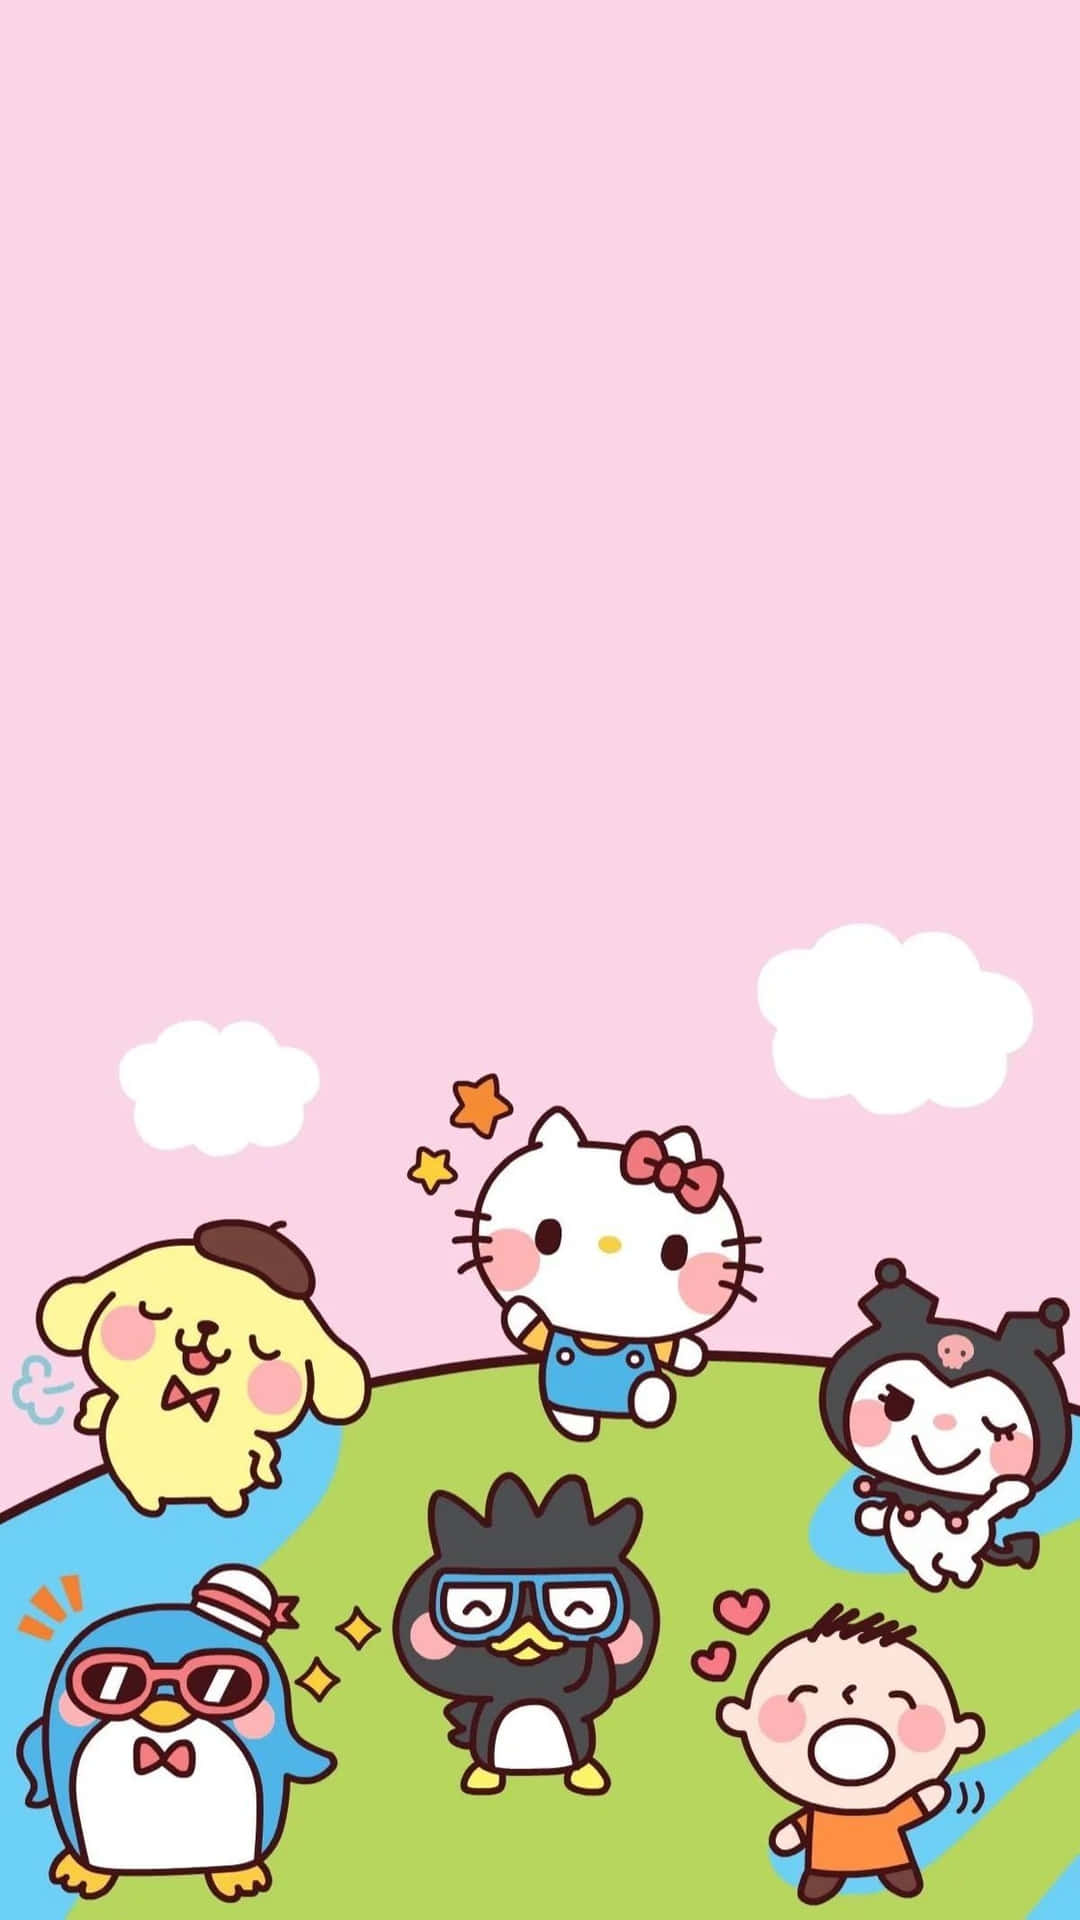 Celebrate Your Love With this Cute Kawaii Valentine Wallpaper